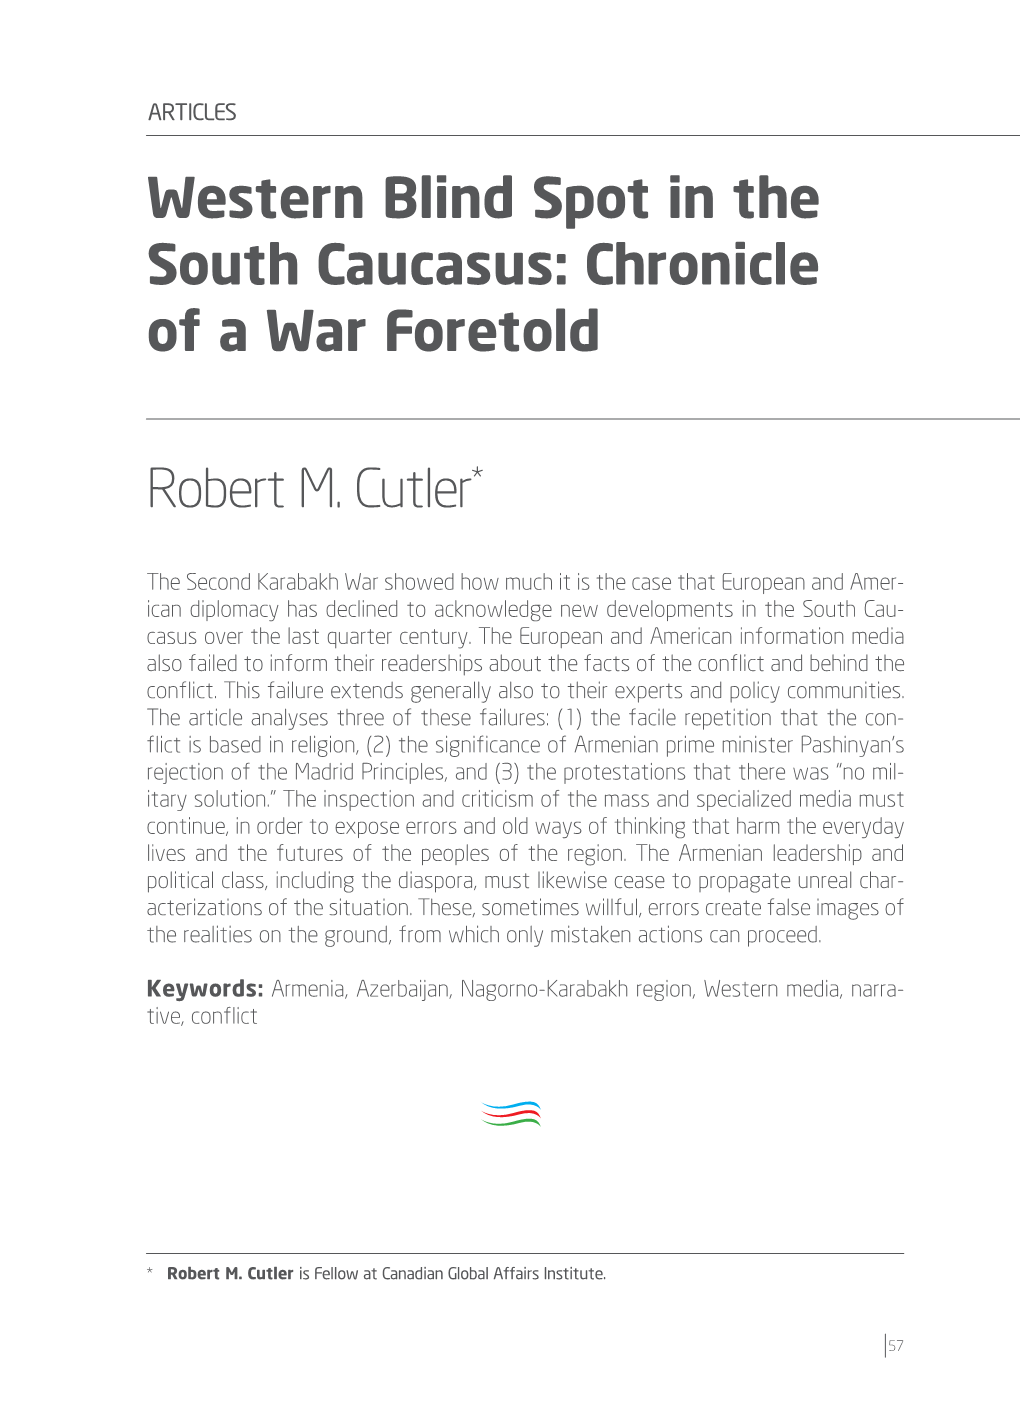 Western Blind Spot in the South Caucasus: Chronicle of a War Foretold